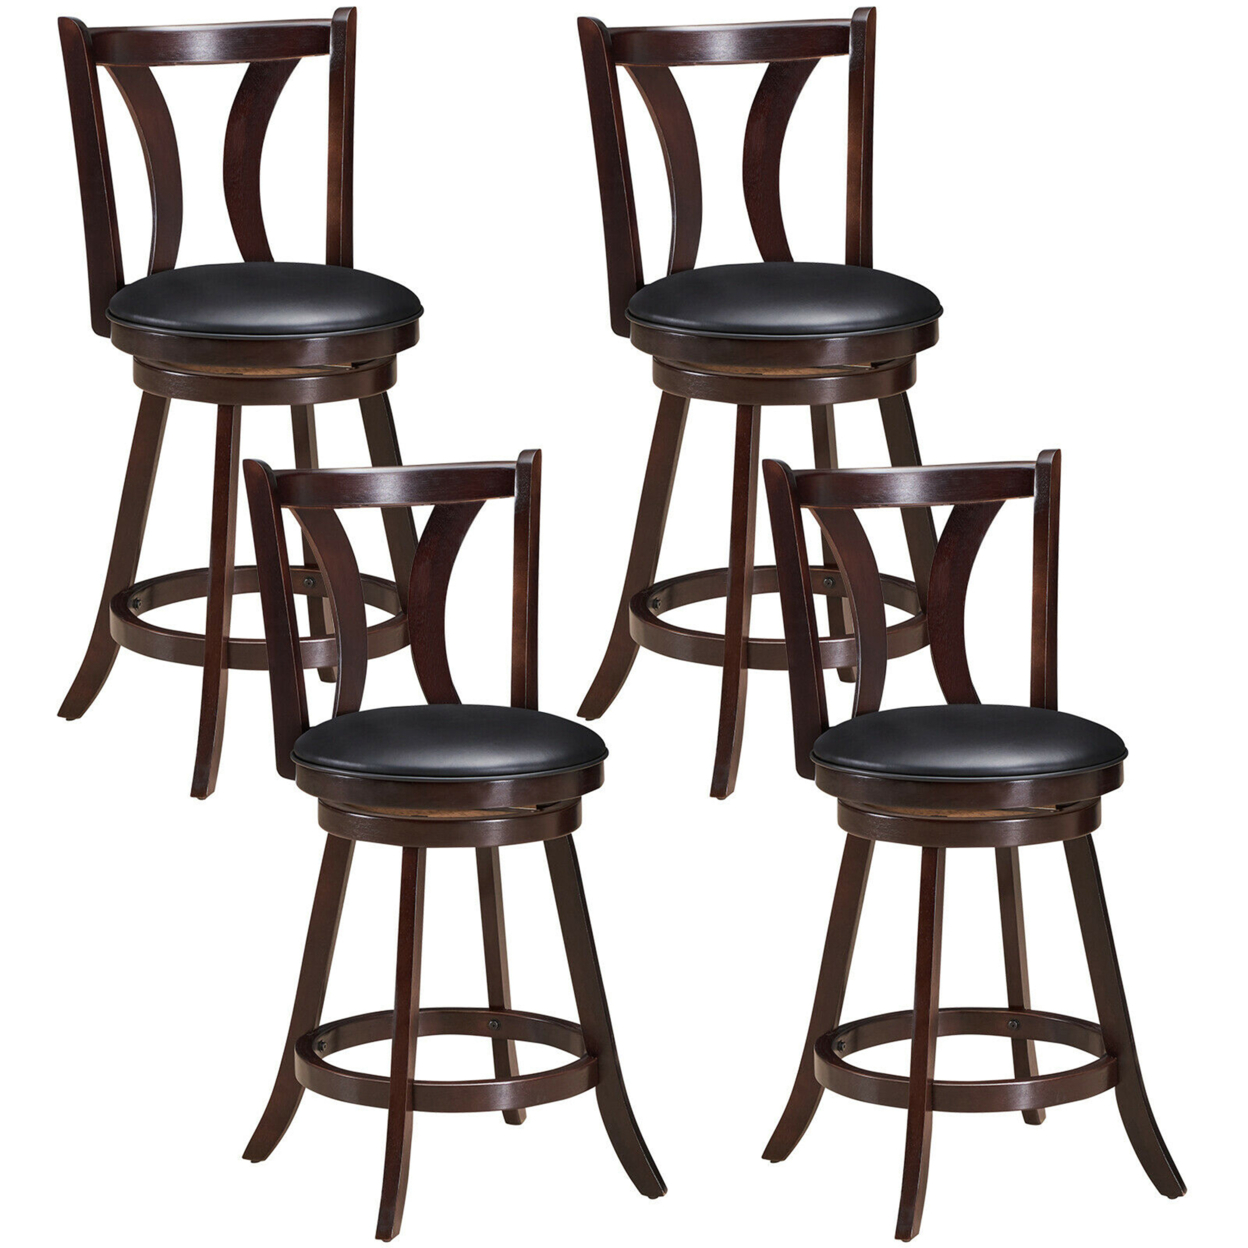 Set Of 4 Swivel Bar Stool 24'' Counter Height Leather Padded Dining Kitchen Chair